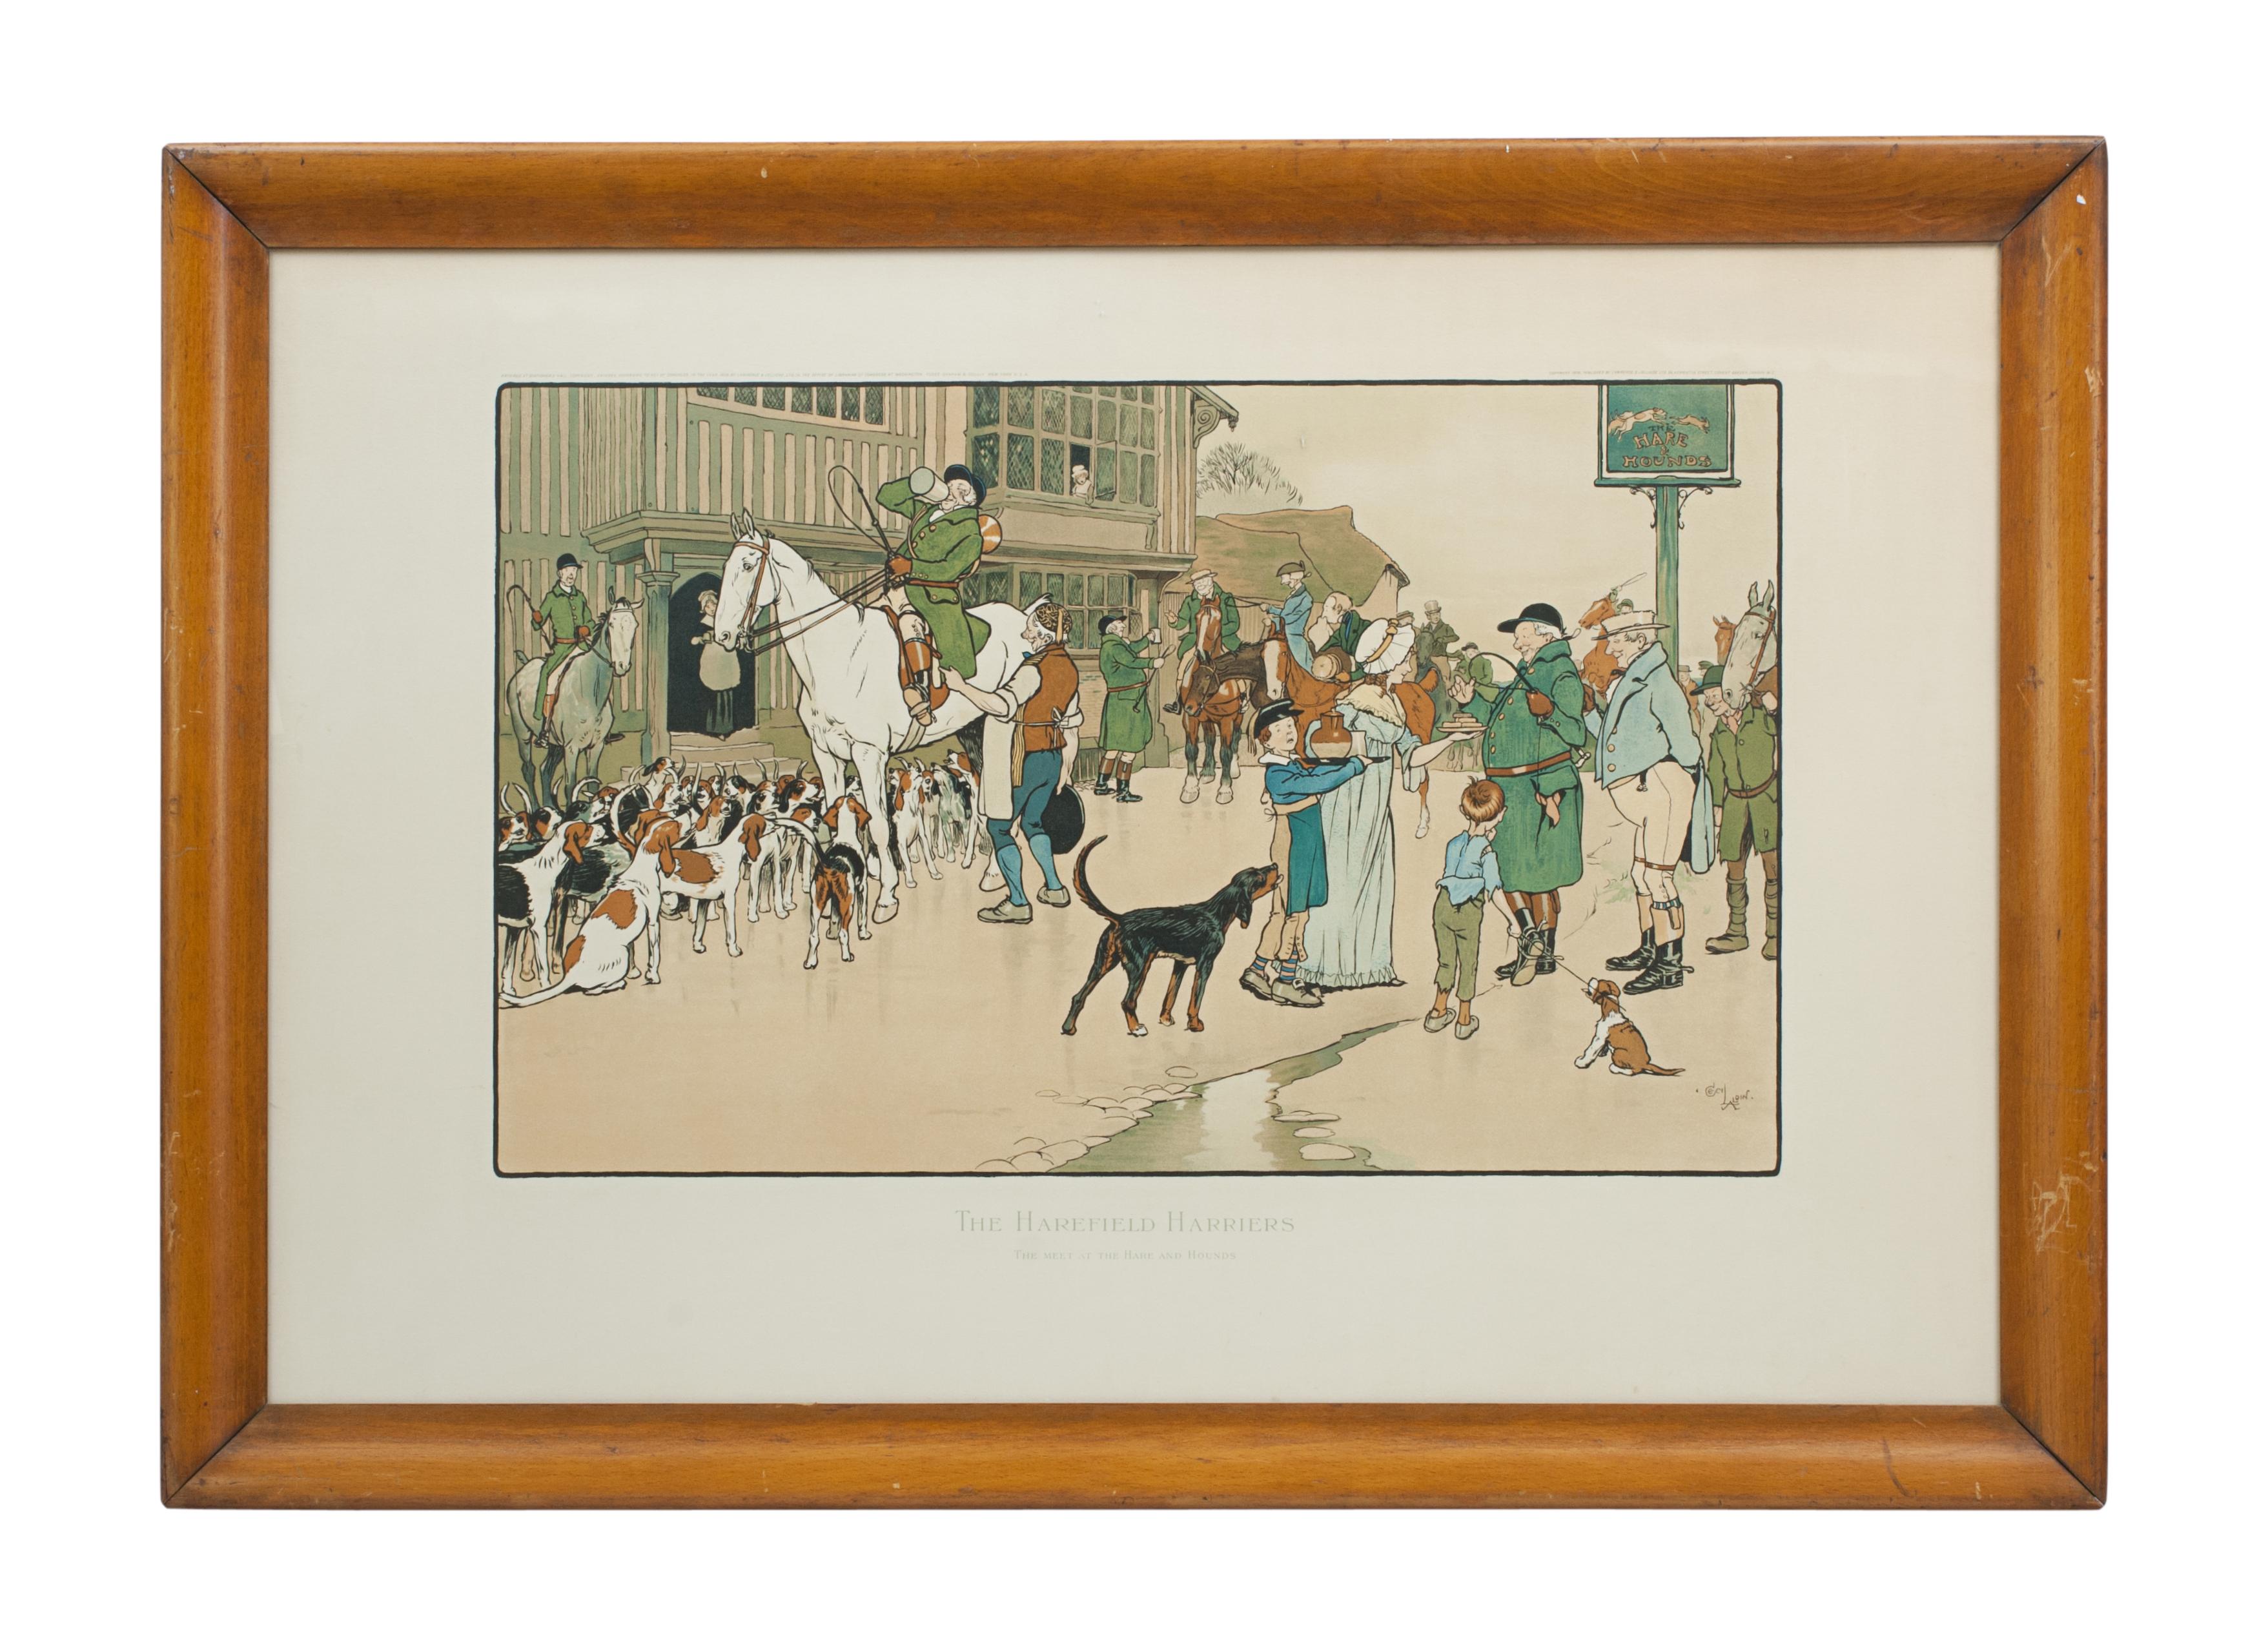 Harefield Harriers, 'The Meet At The Hare And Hounds'.
A fine print by Cecil Aldin from The Harefield Harriers, The Meet At The Hare And Hounds. This early humorous fox hunting chromolithograph is in original frame and with great colour. Aldin